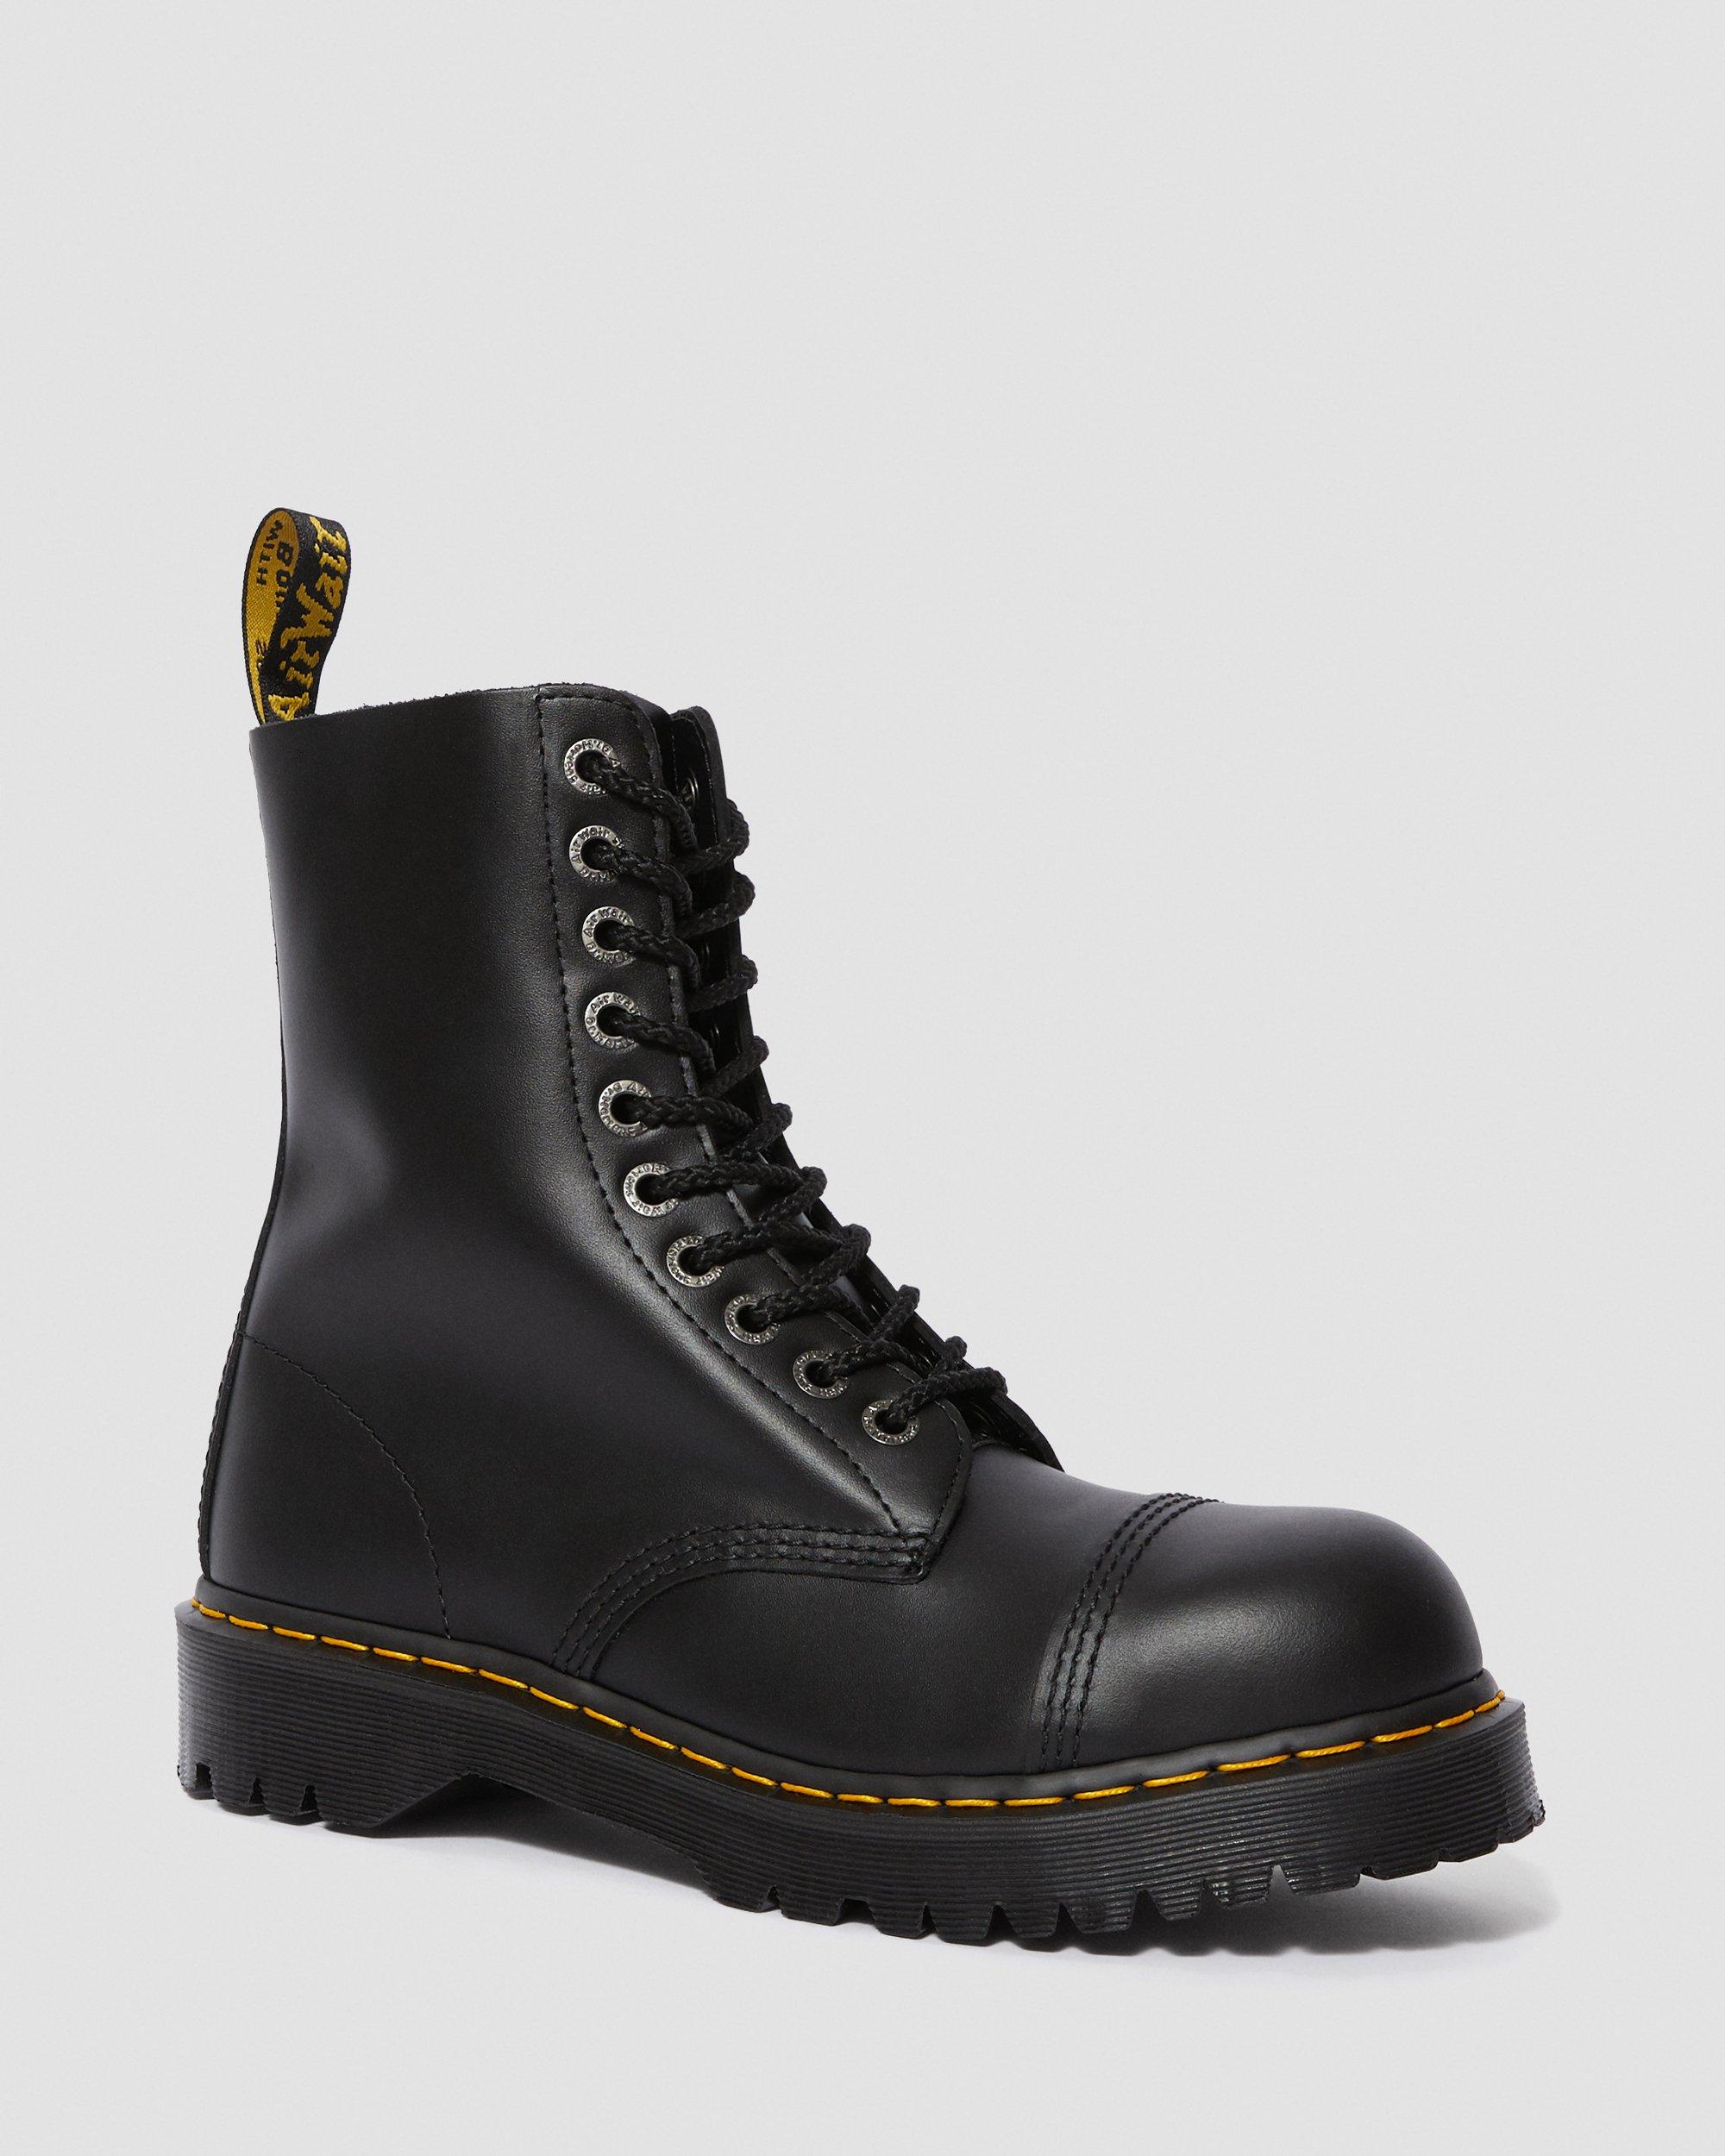 black leather steel toe shoes